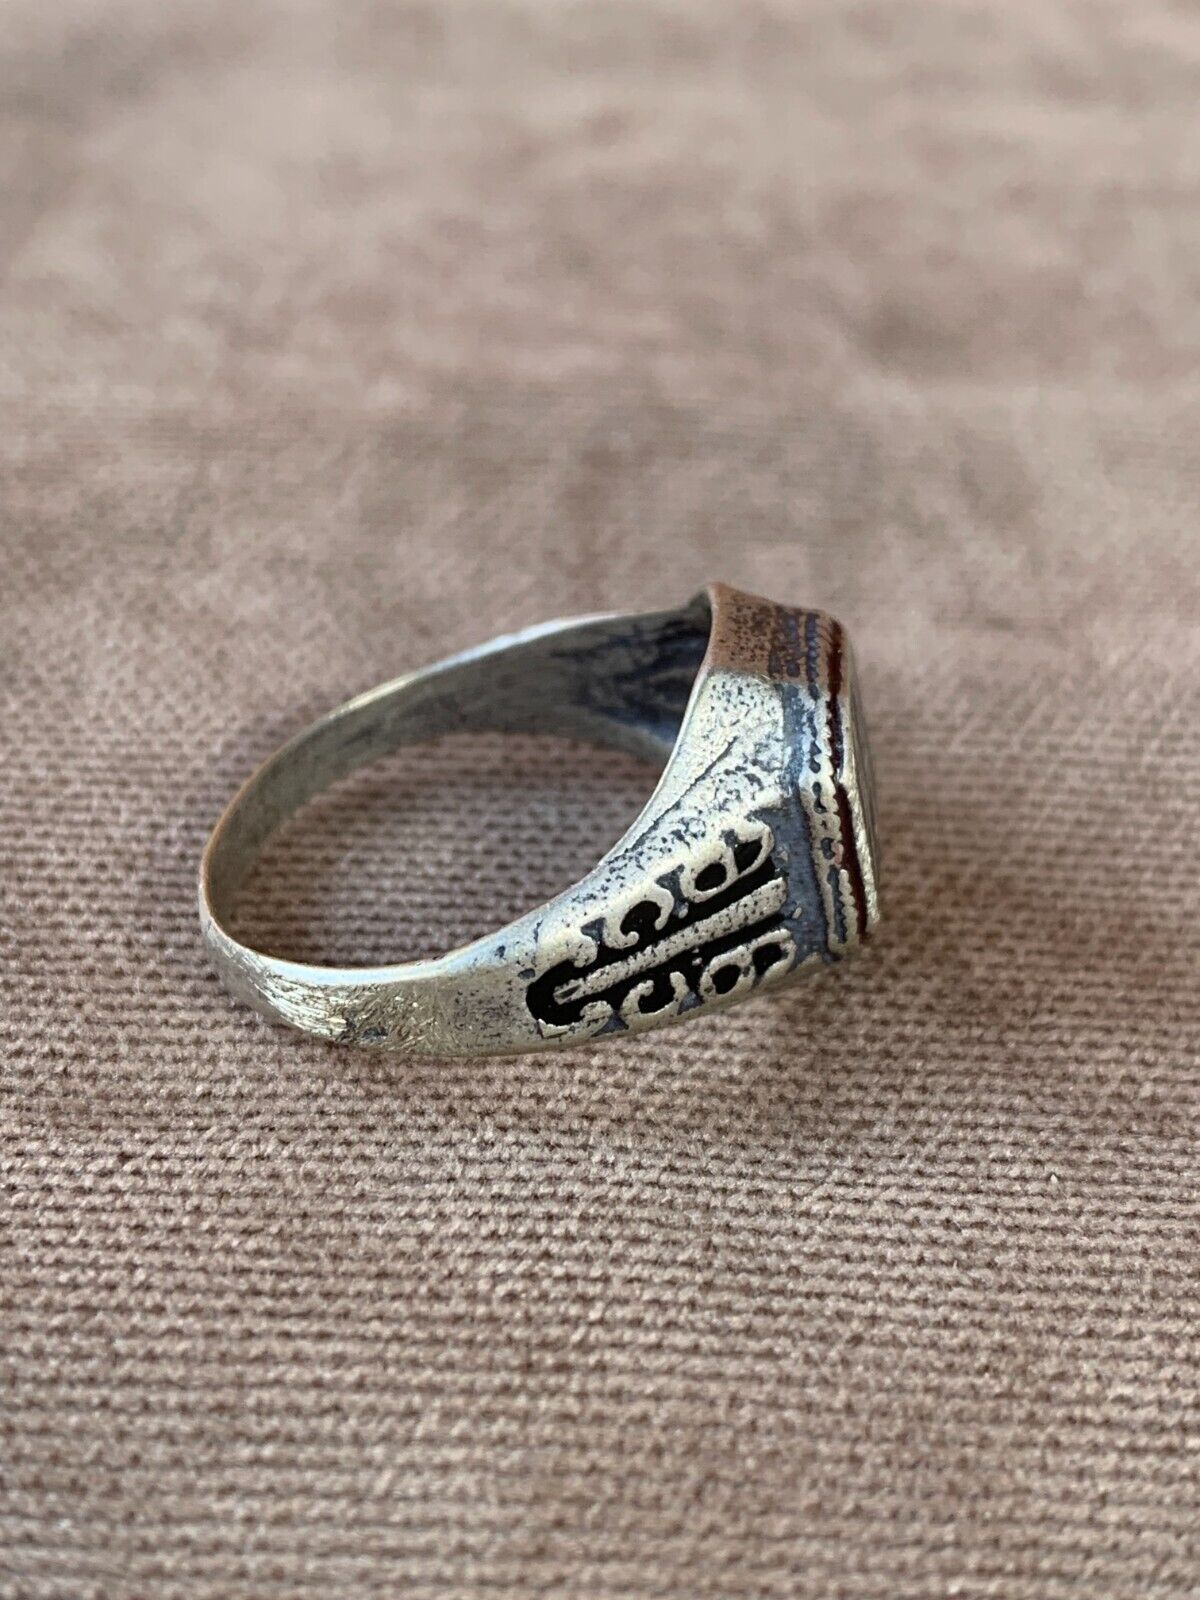 Officer's ring. Wehrmacht 1939-1945 WWII WW2